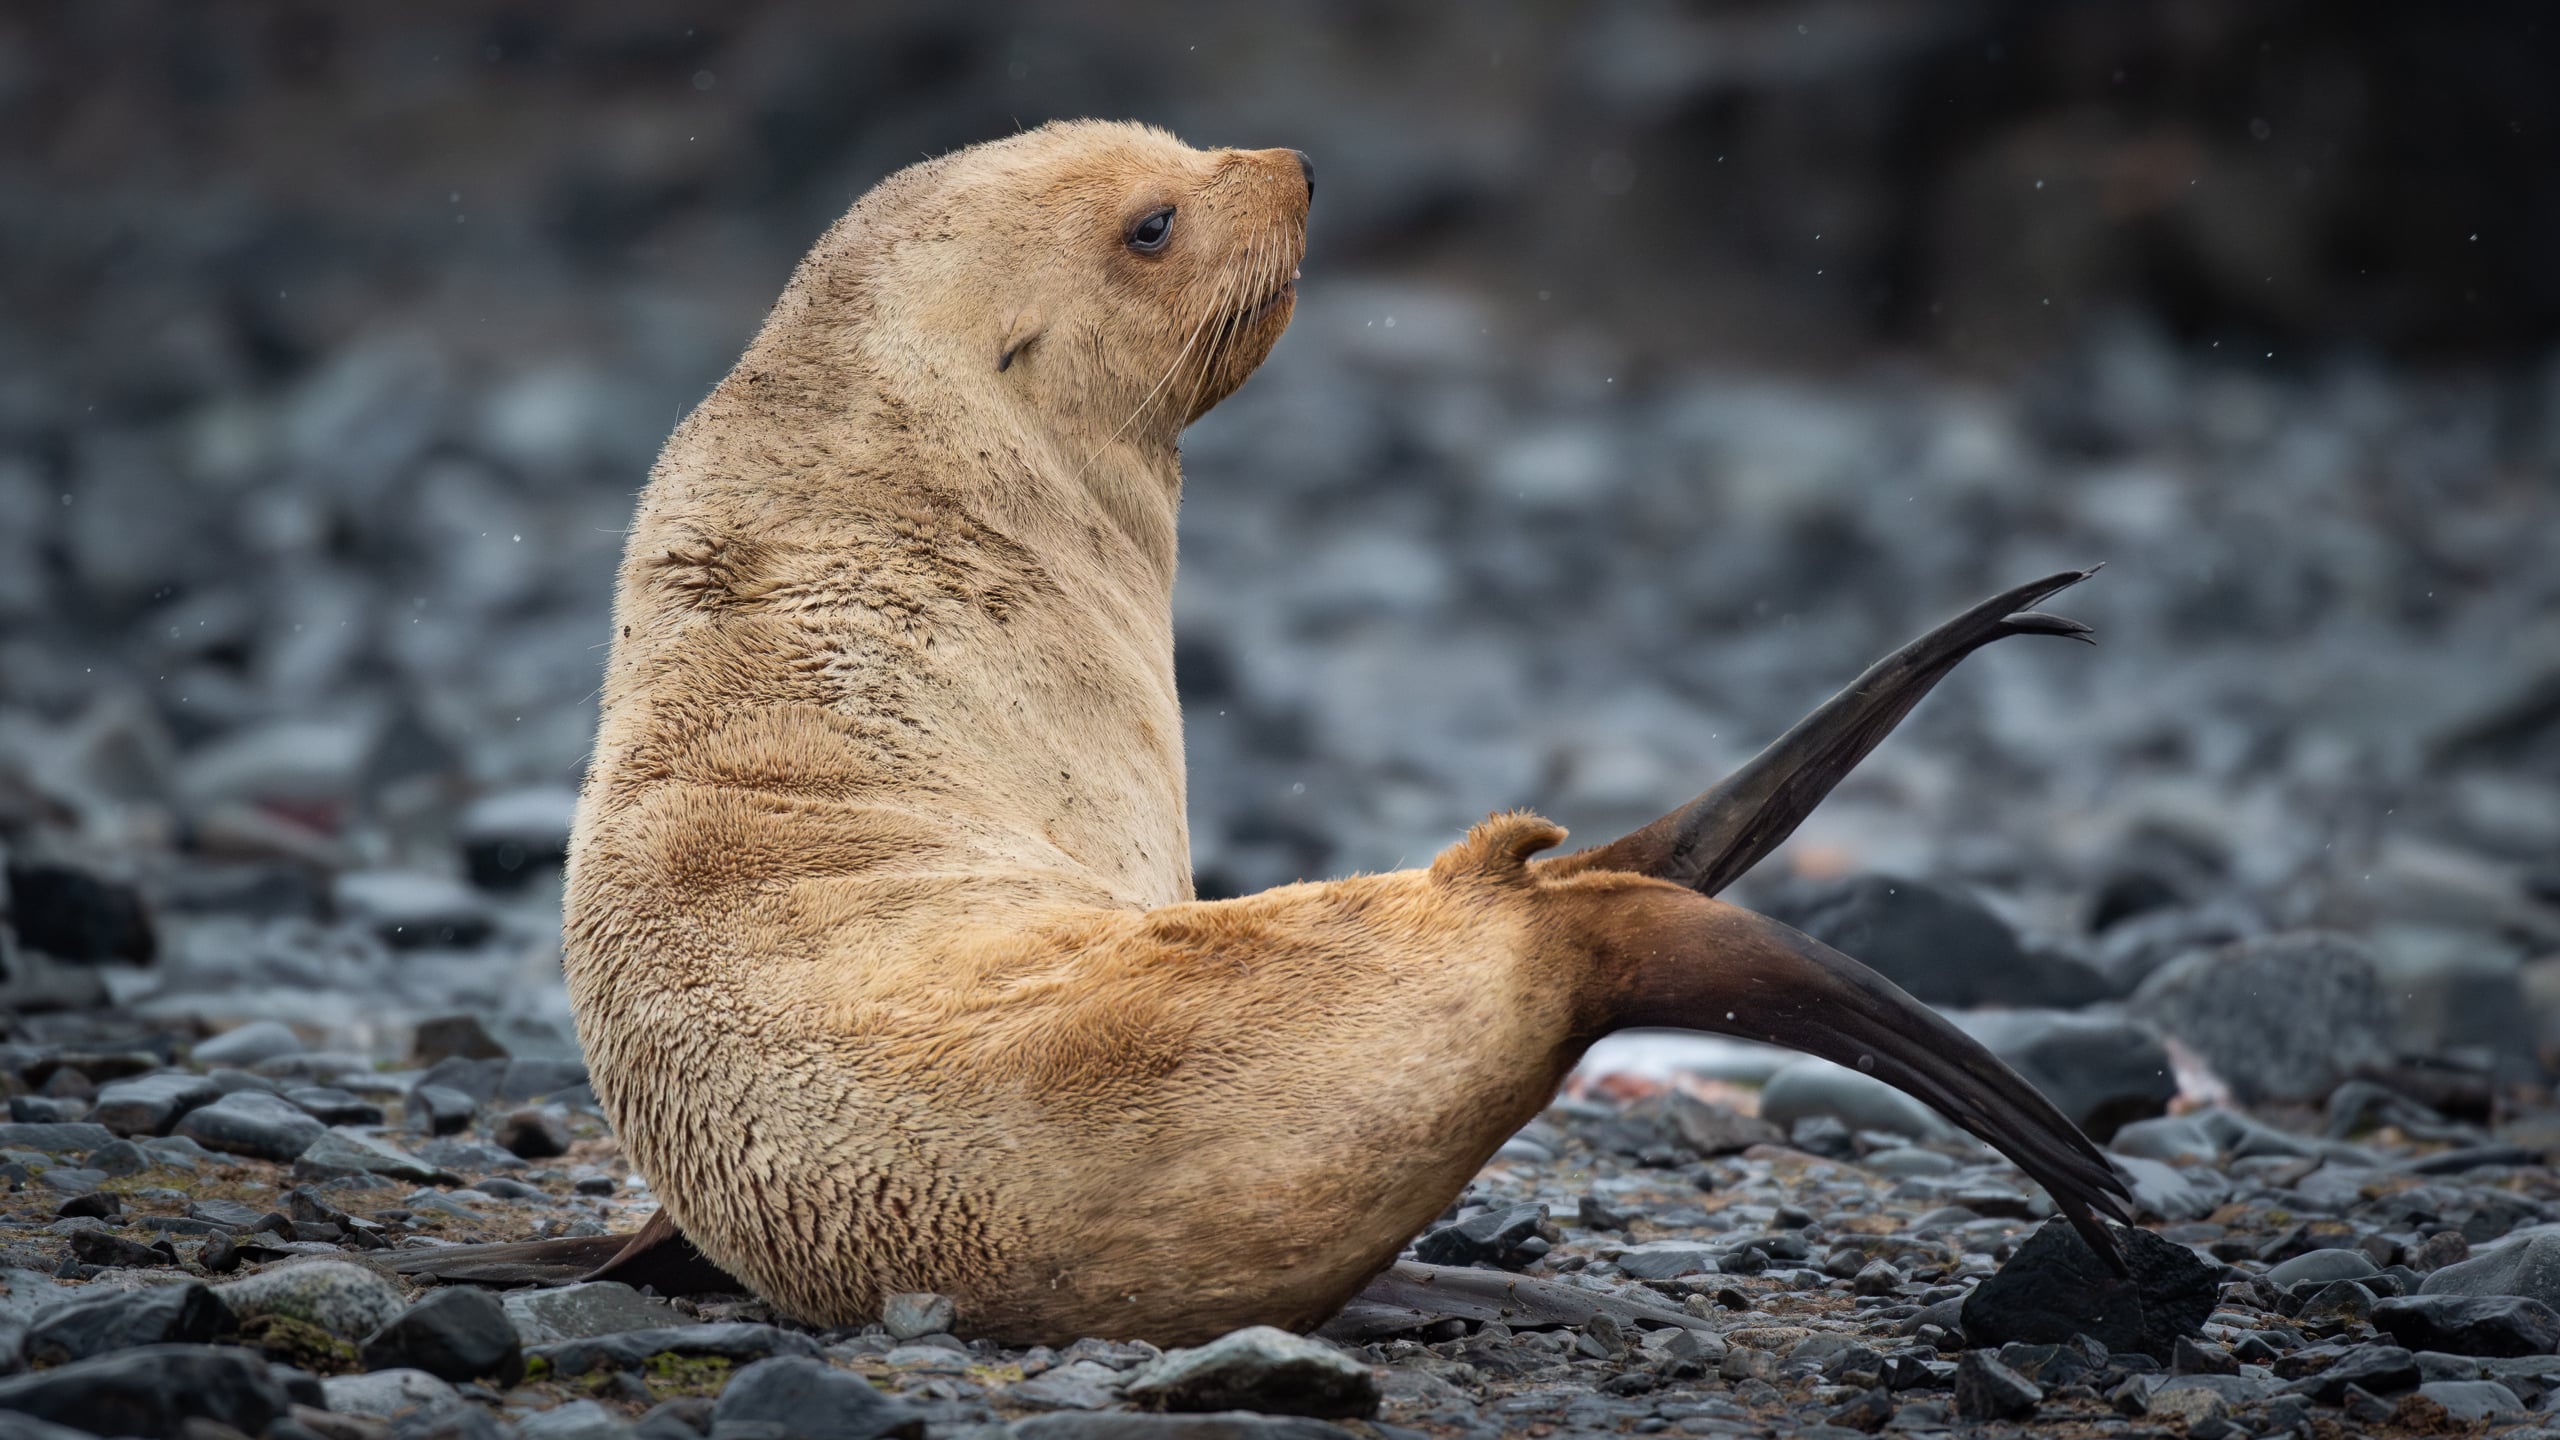 It's not an albono, however this blonde Antarctic fur seal does suffer from "a recessive loss-of-function mutation", basically meaning it lacks pigmentation.